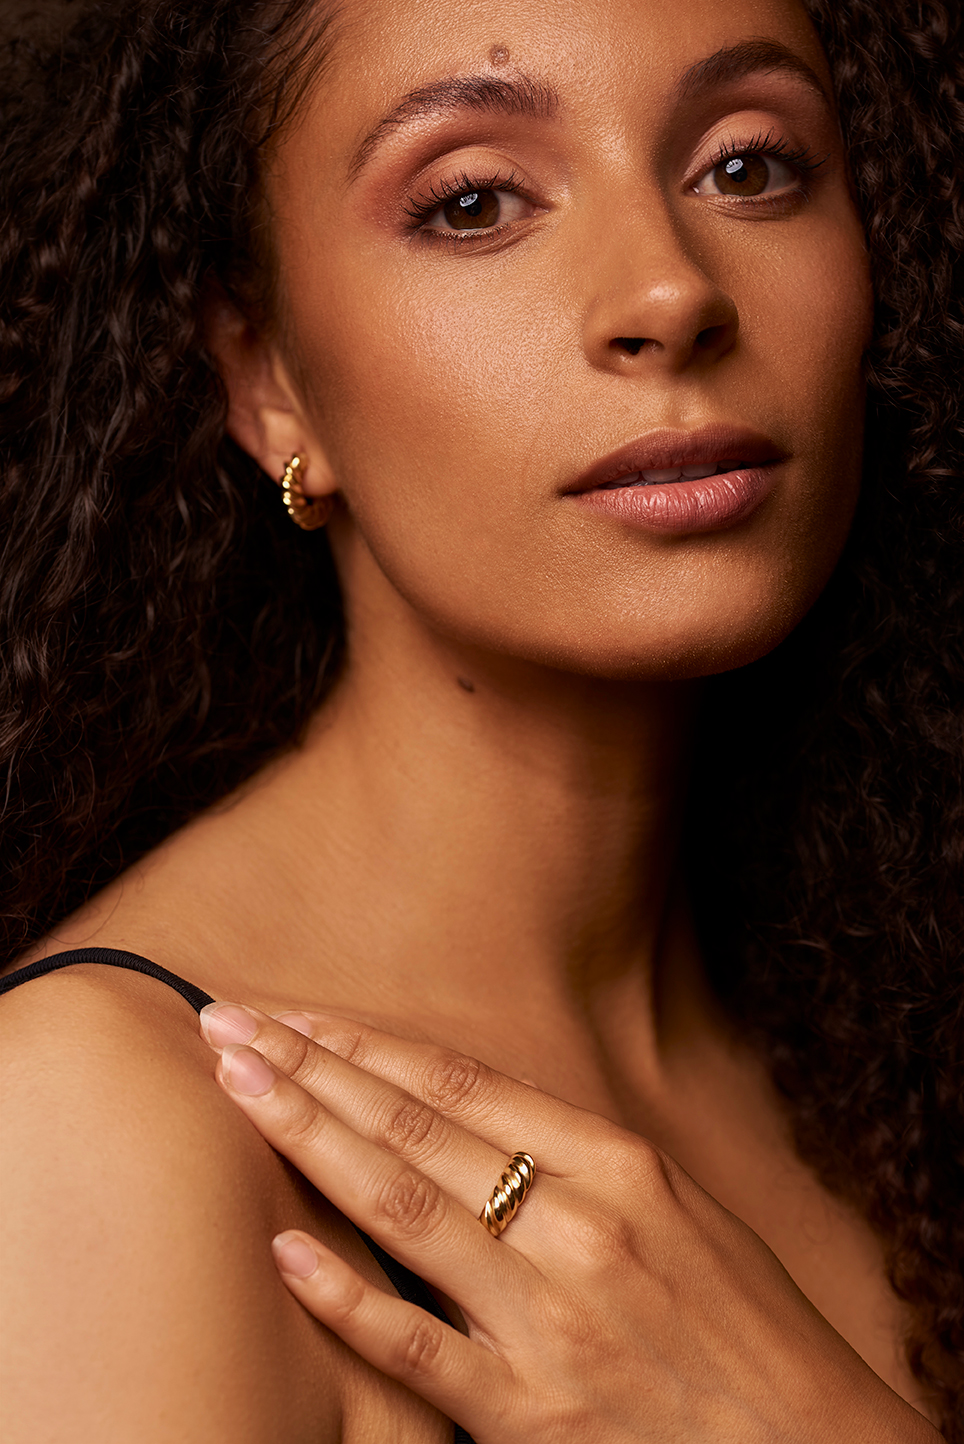 Model holding her hand on her shoulder to showcase her earring and ring.